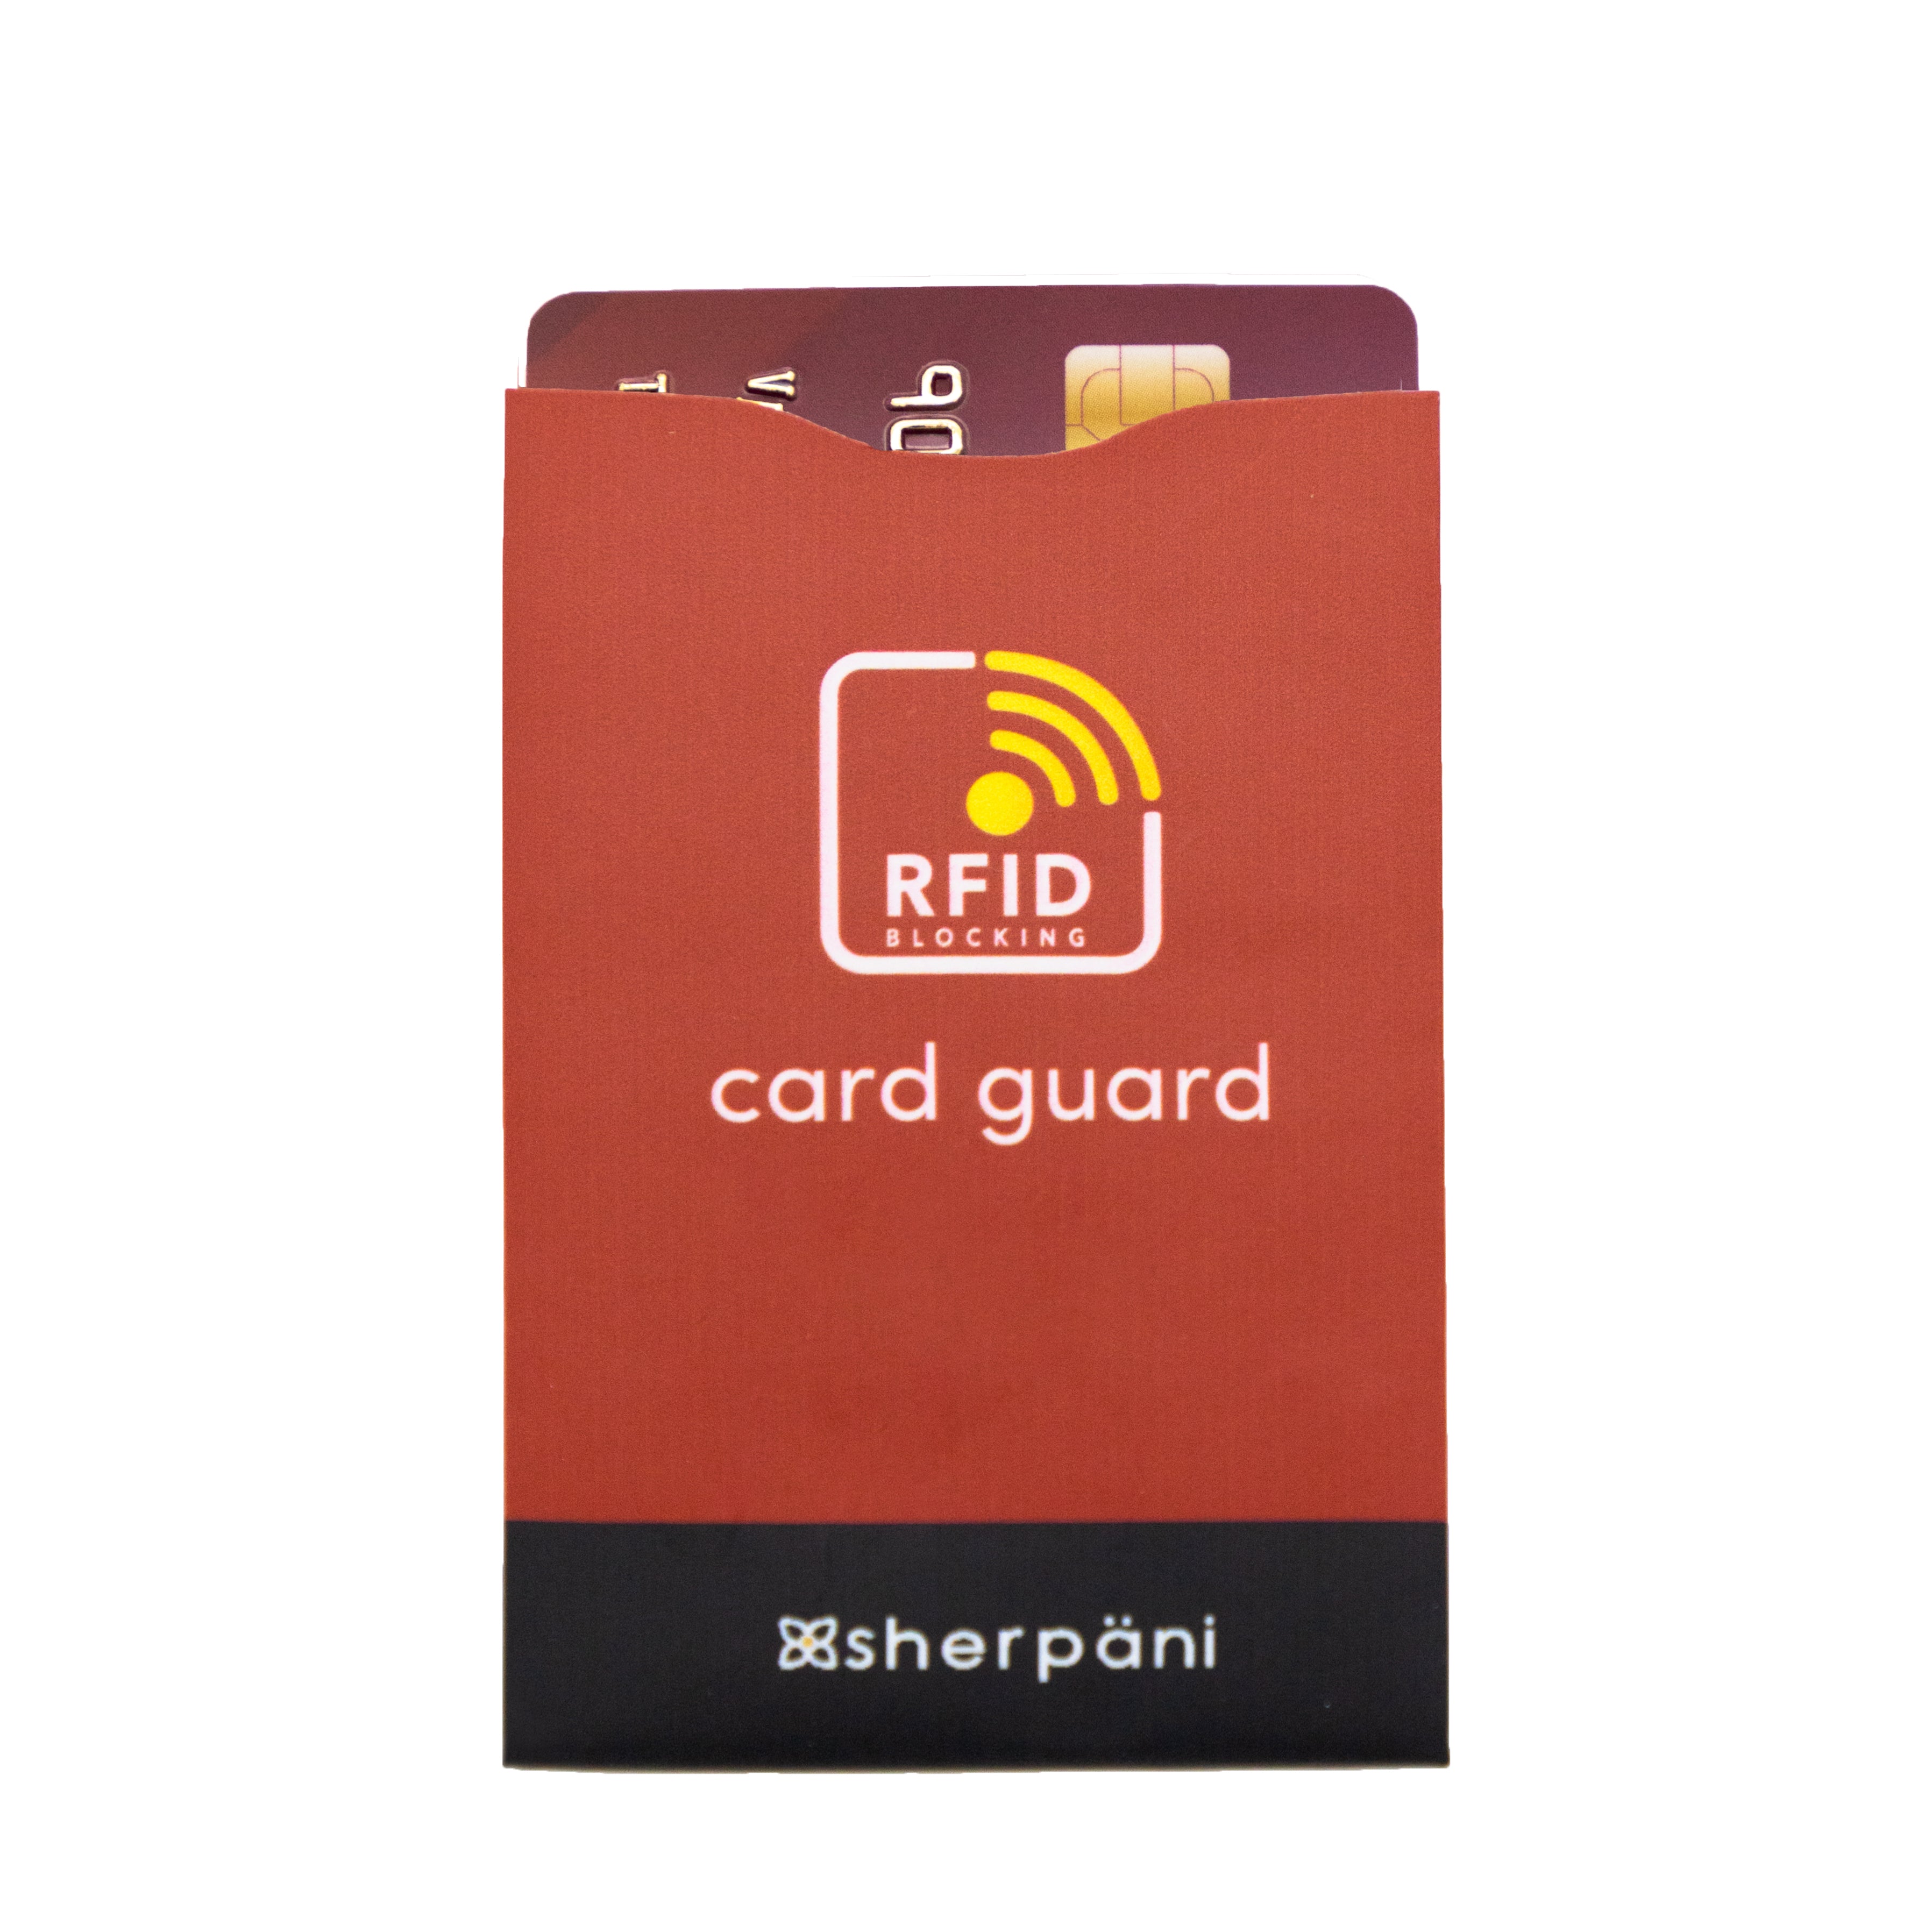 Boxiki Travel RFID Blocking Sleeves, Set with Color Coding | Identity Theft  Prevention RFID Blocking Envelopes and Passport Covers